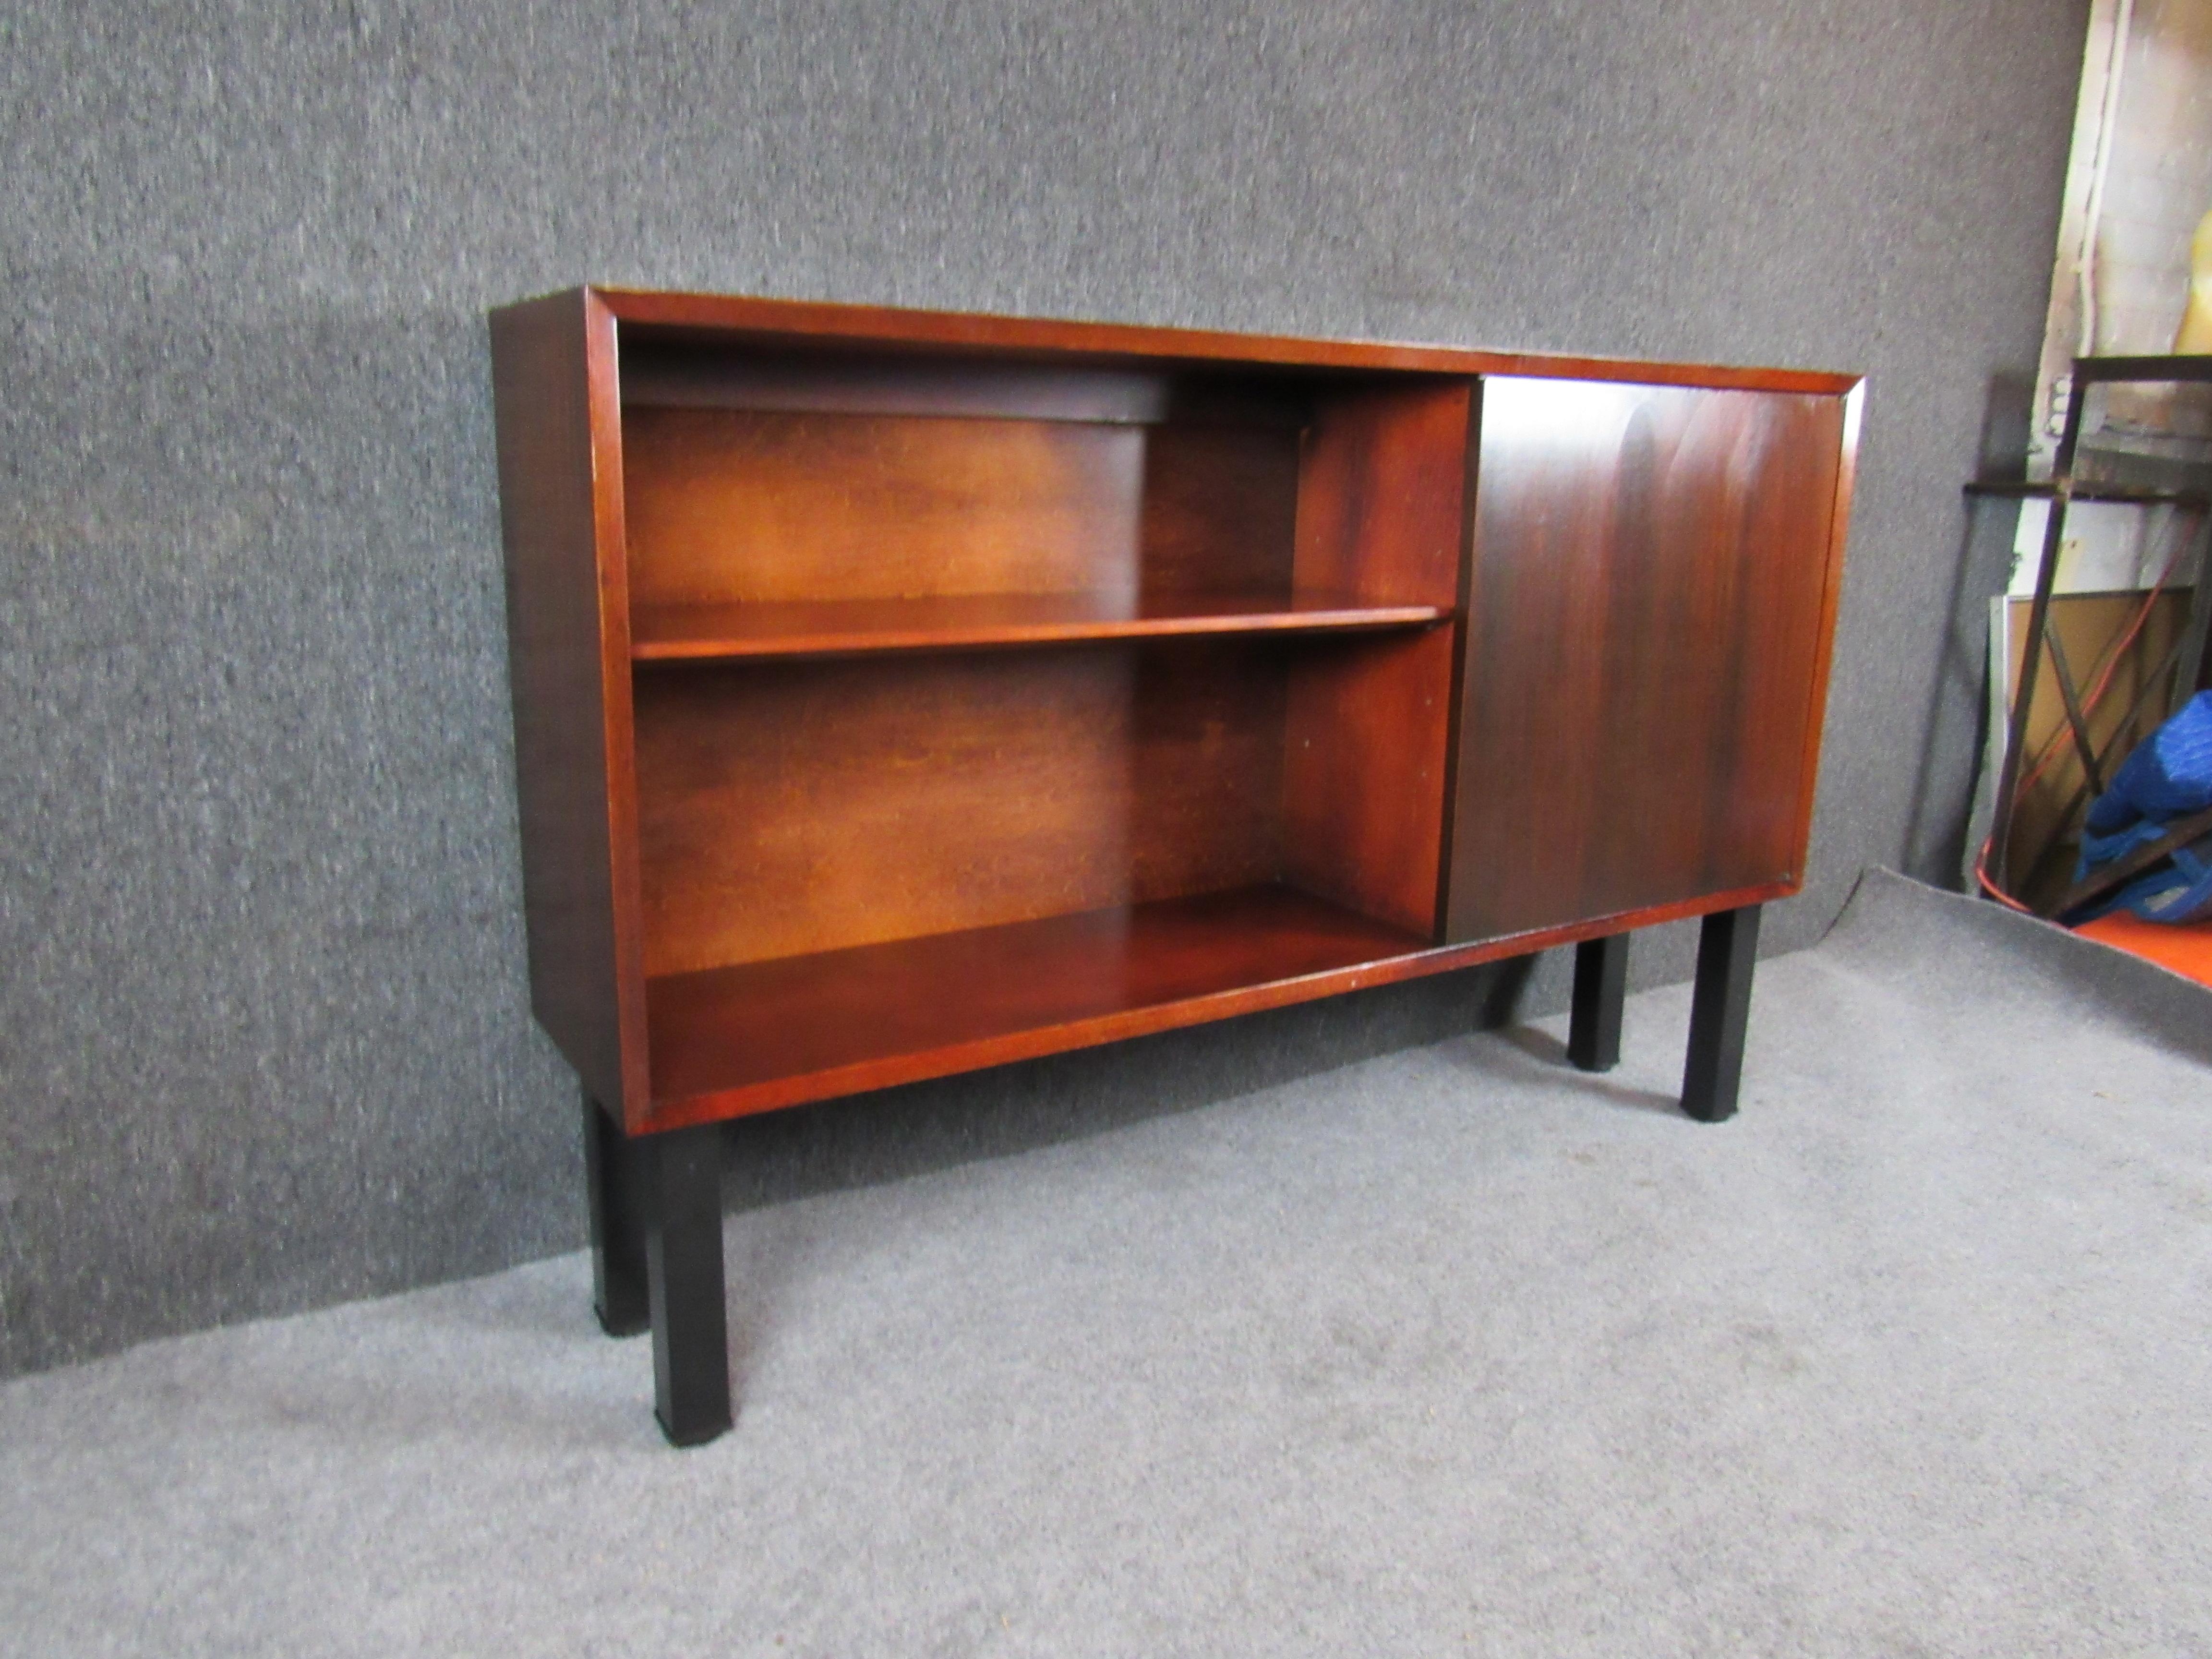 Very unique vintage cabinet designed by George Nelson and manufactured by Herman Miller at their Zeeland, Michigan factory. This early example features an unusual mahogany construction and still bears its original foil stamp, dating it to the early